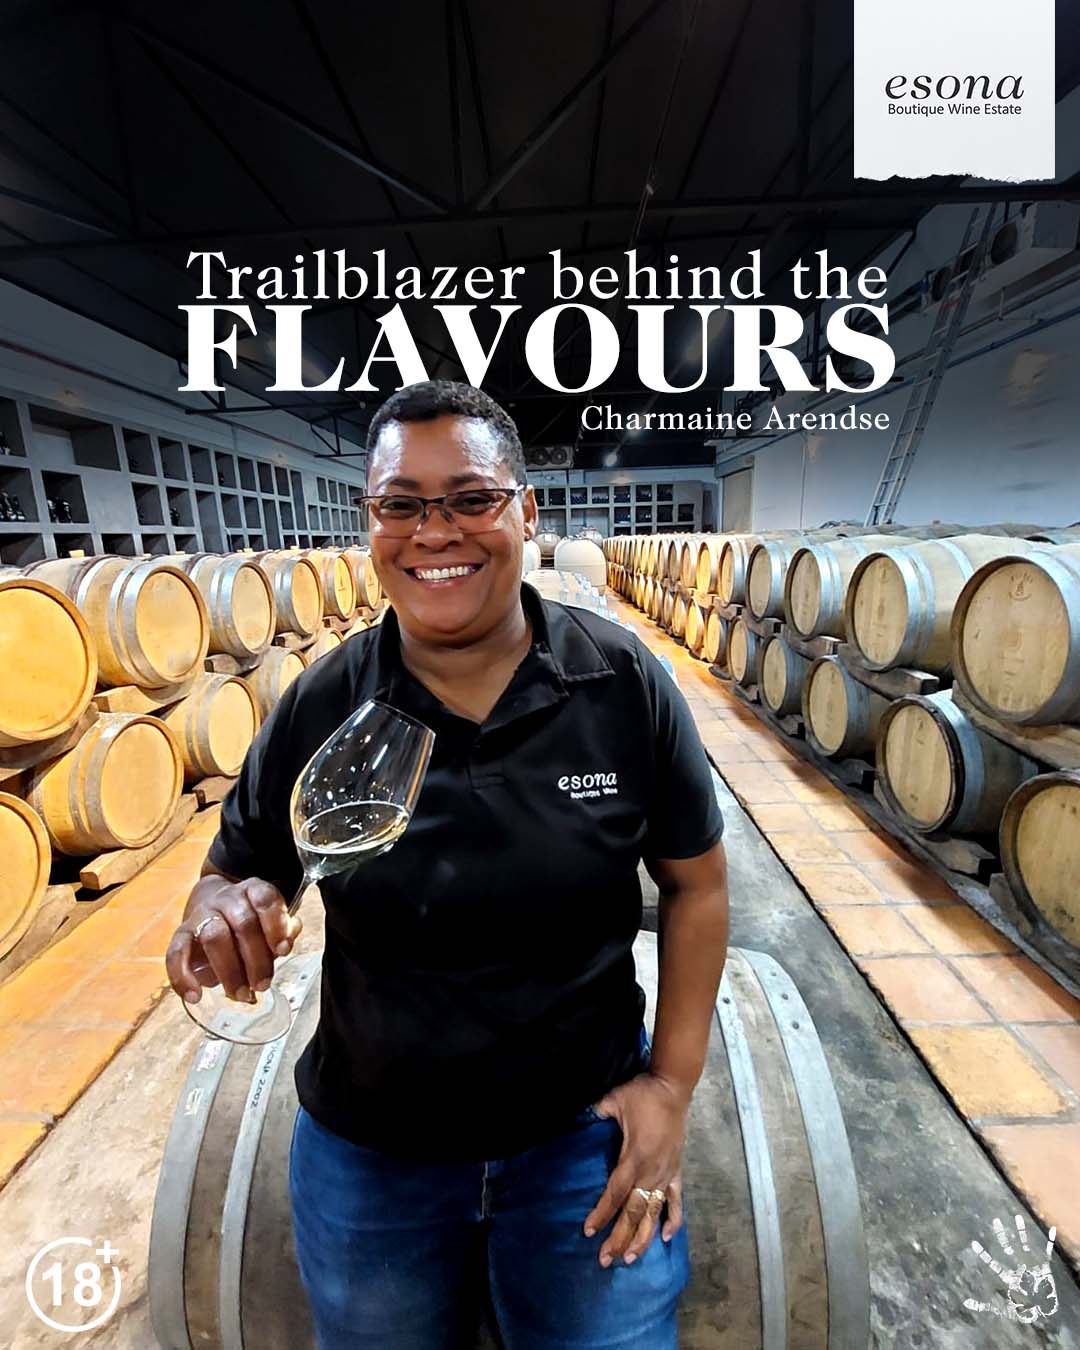 Esona Charmaine Arendse Winemaker Robertson South Africa